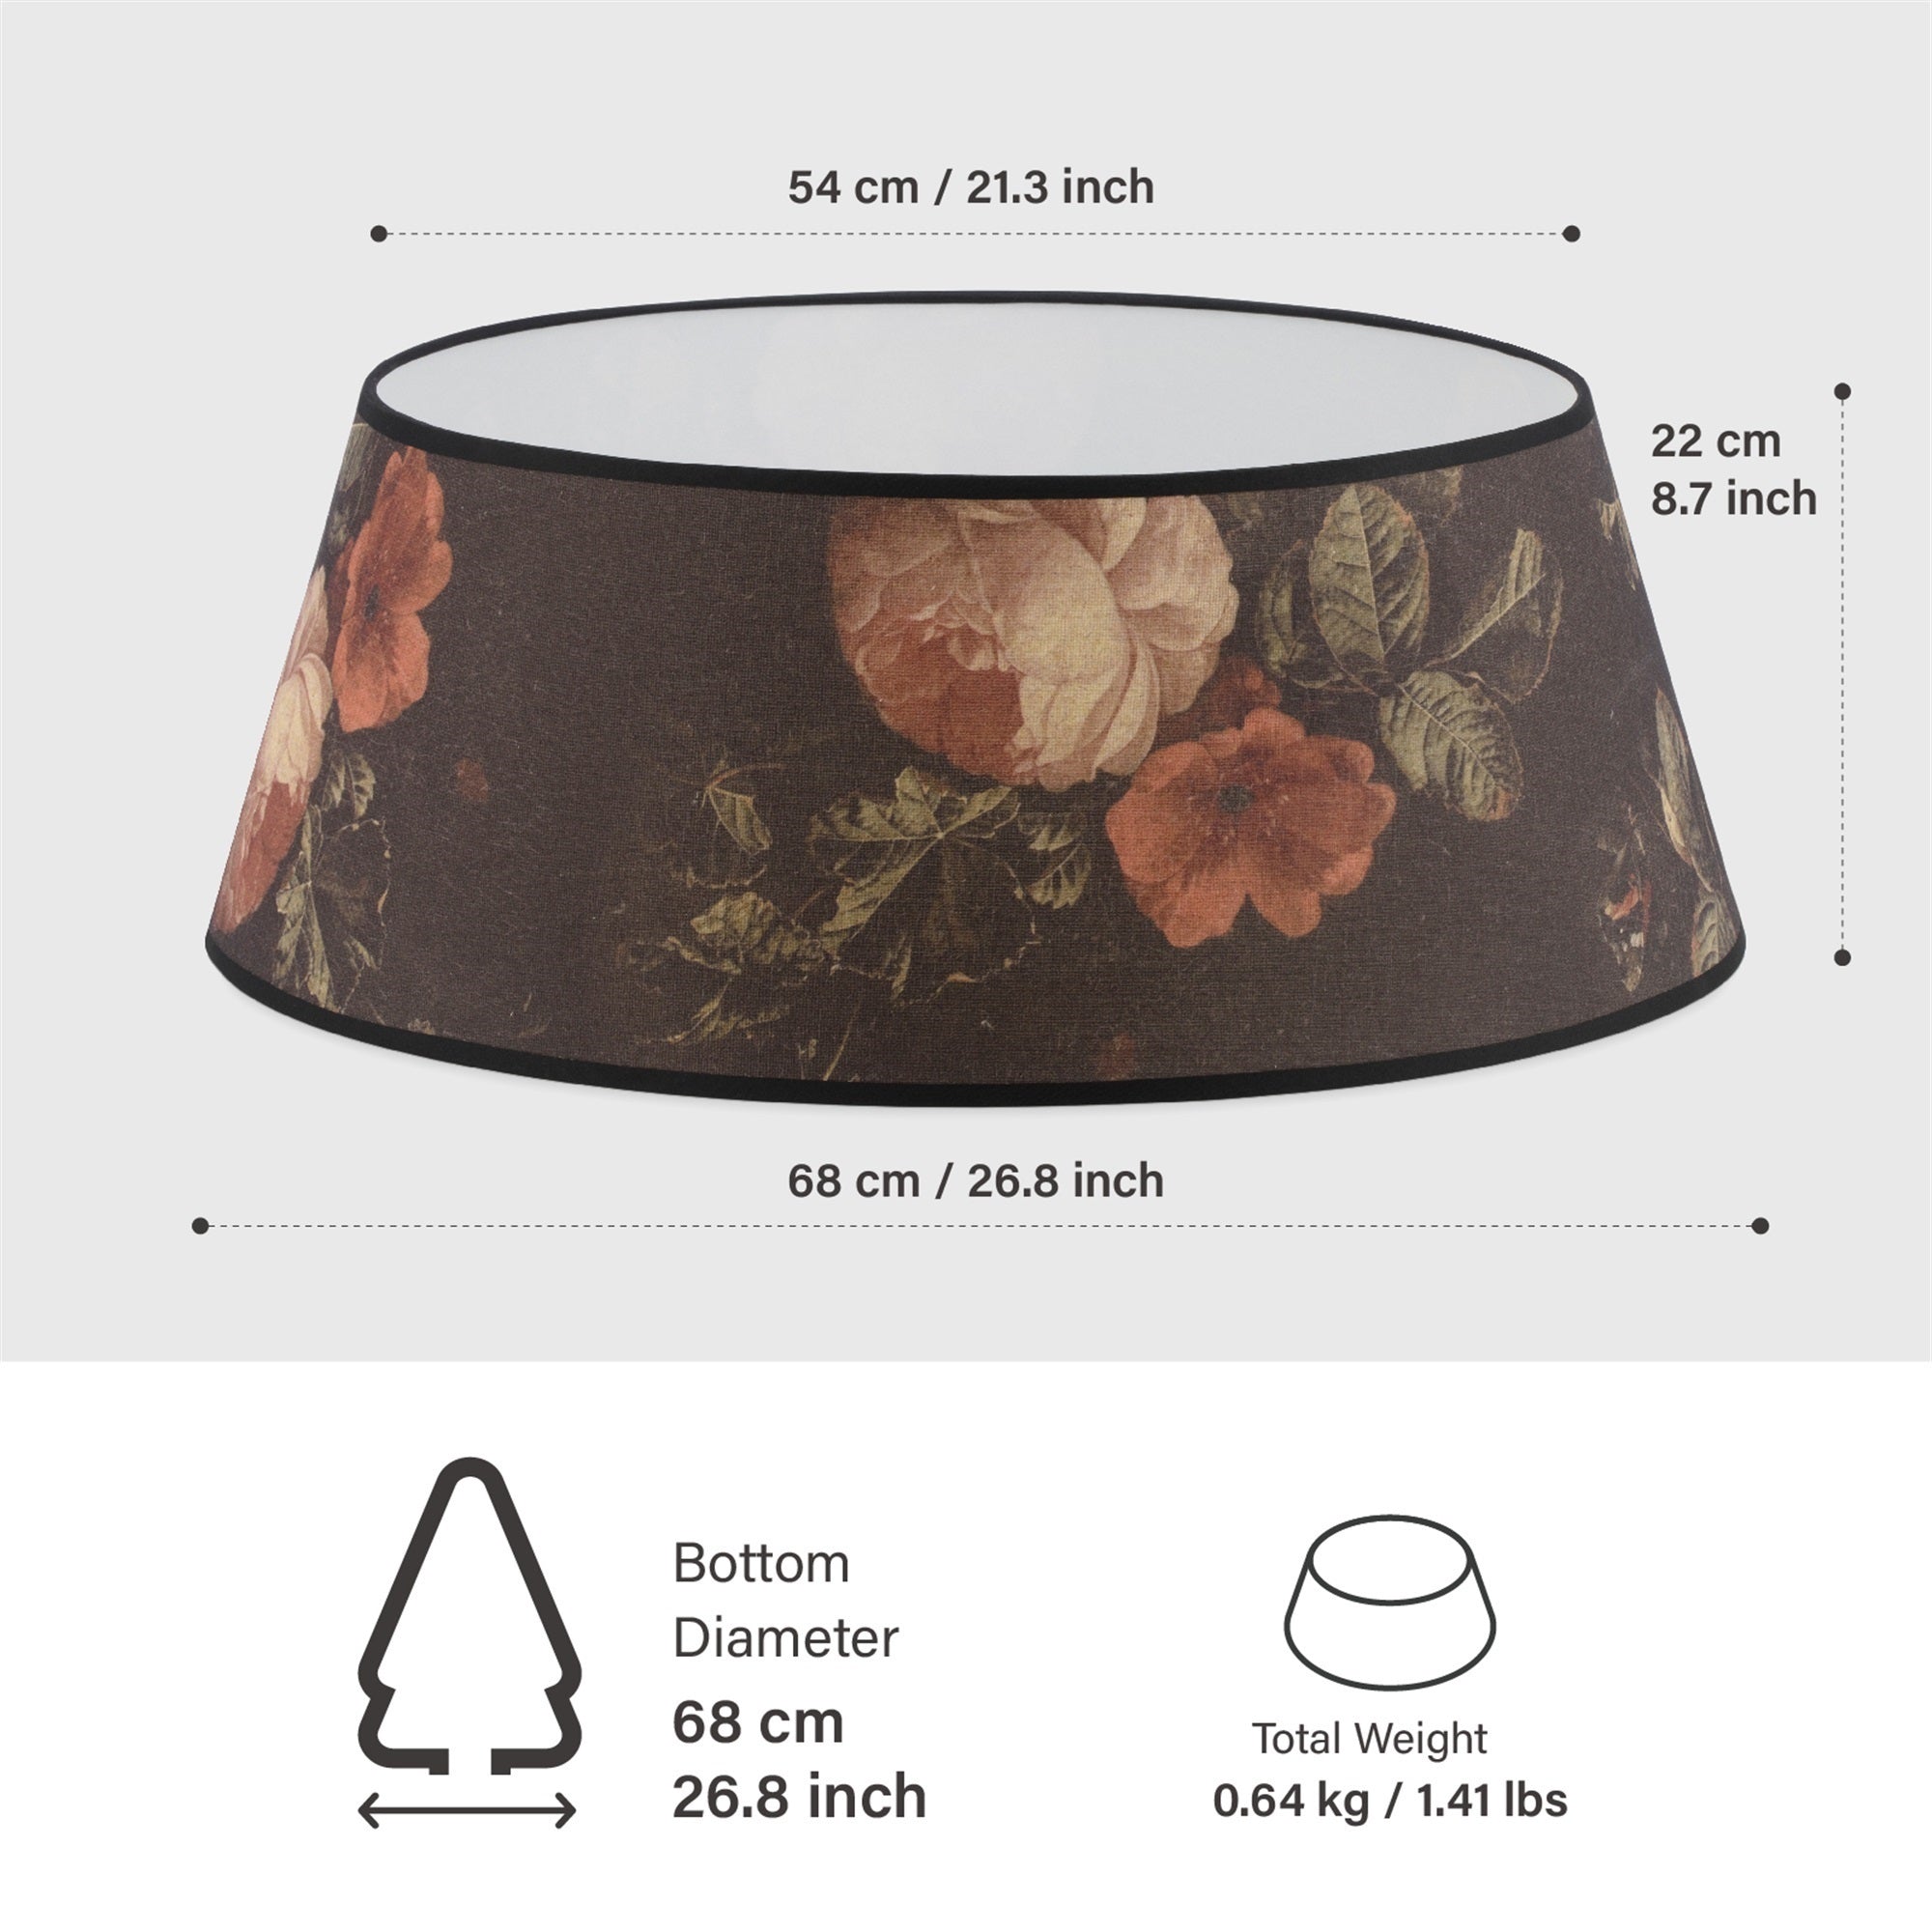 Tree Nest Large Gallery Christmas Tree Collar Round Ring Skirt Base Durable Fabric Cover Christmas Decorations, Colorful, 27"